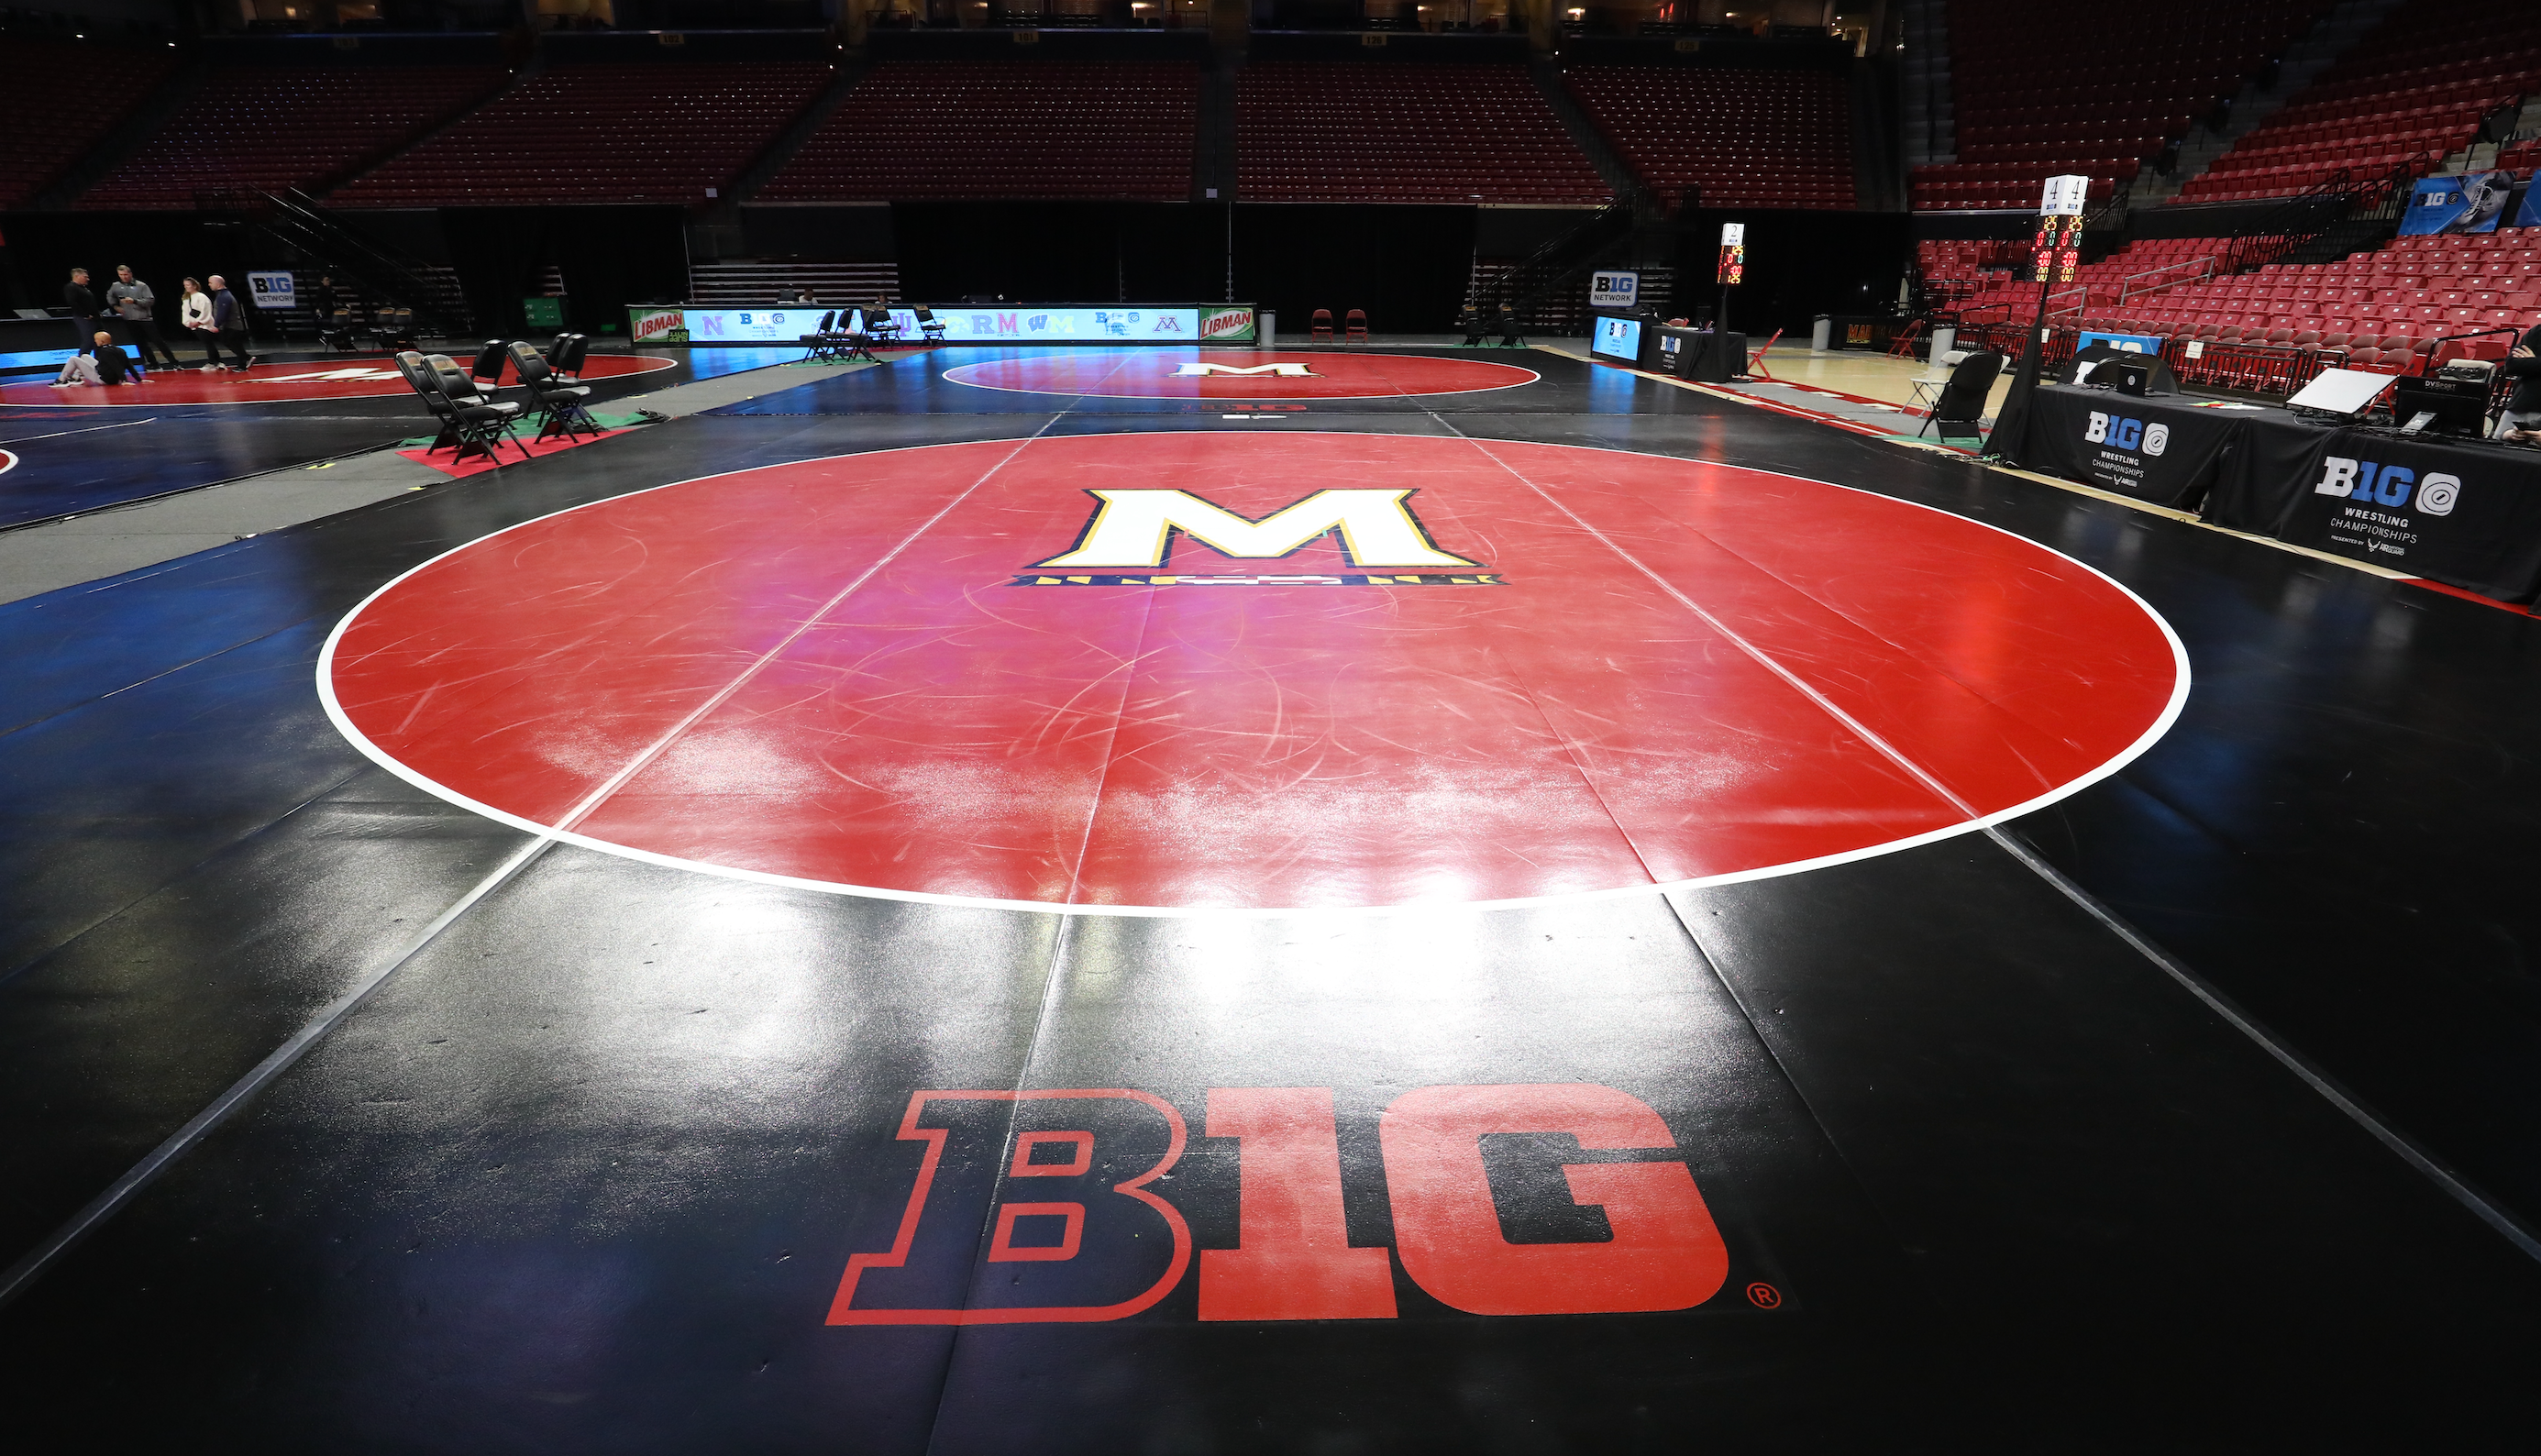 The Ultimate Transformation of University of Marylands's Wrestling Room - Resilite Classic Mats